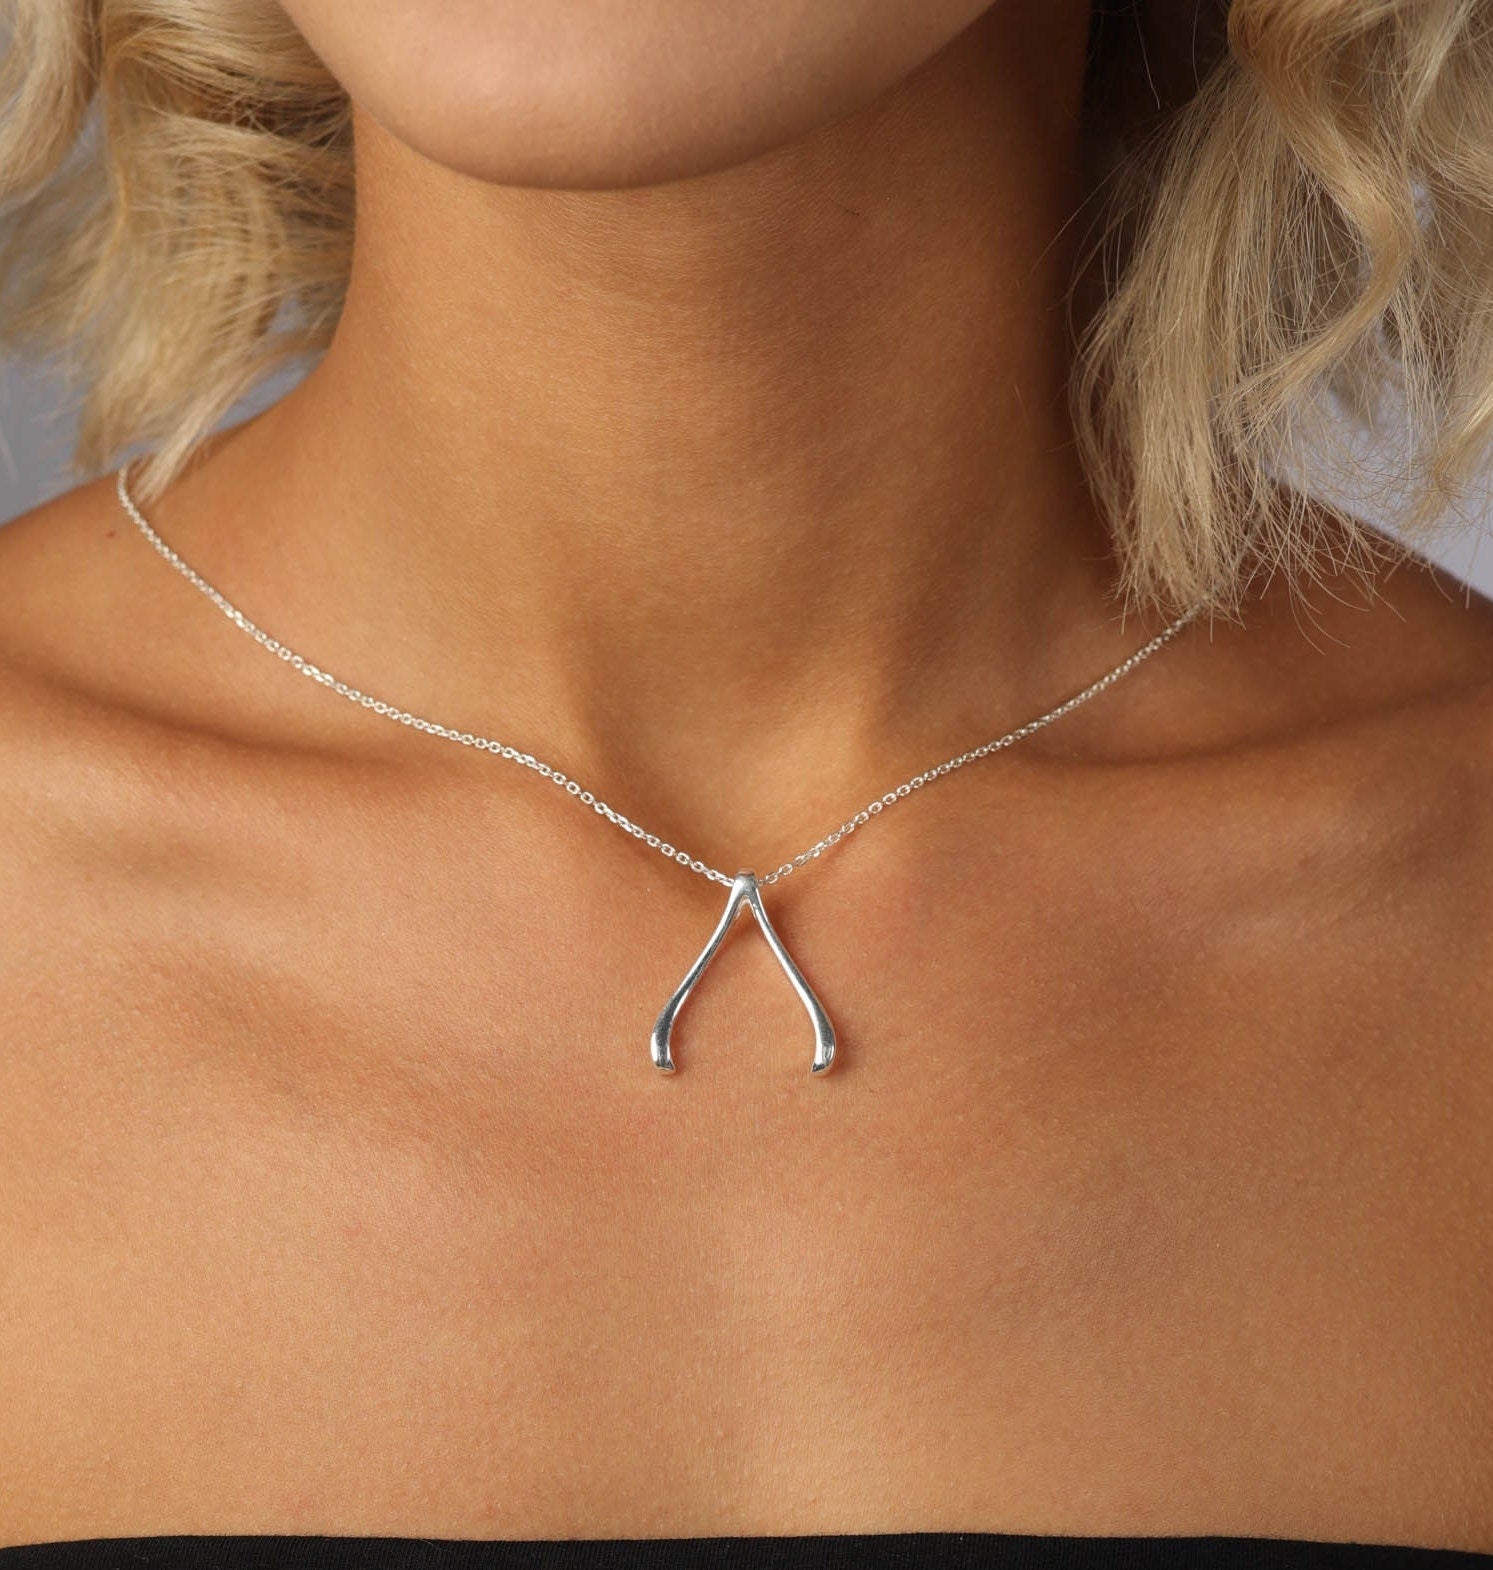 Buy Gold Wishbone Necklace, Lucky Charm Necklace, Good Luck Pendant, Gift  Idea for Her, Most Popular Item, Silver Upon Req. Online in India - Etsy